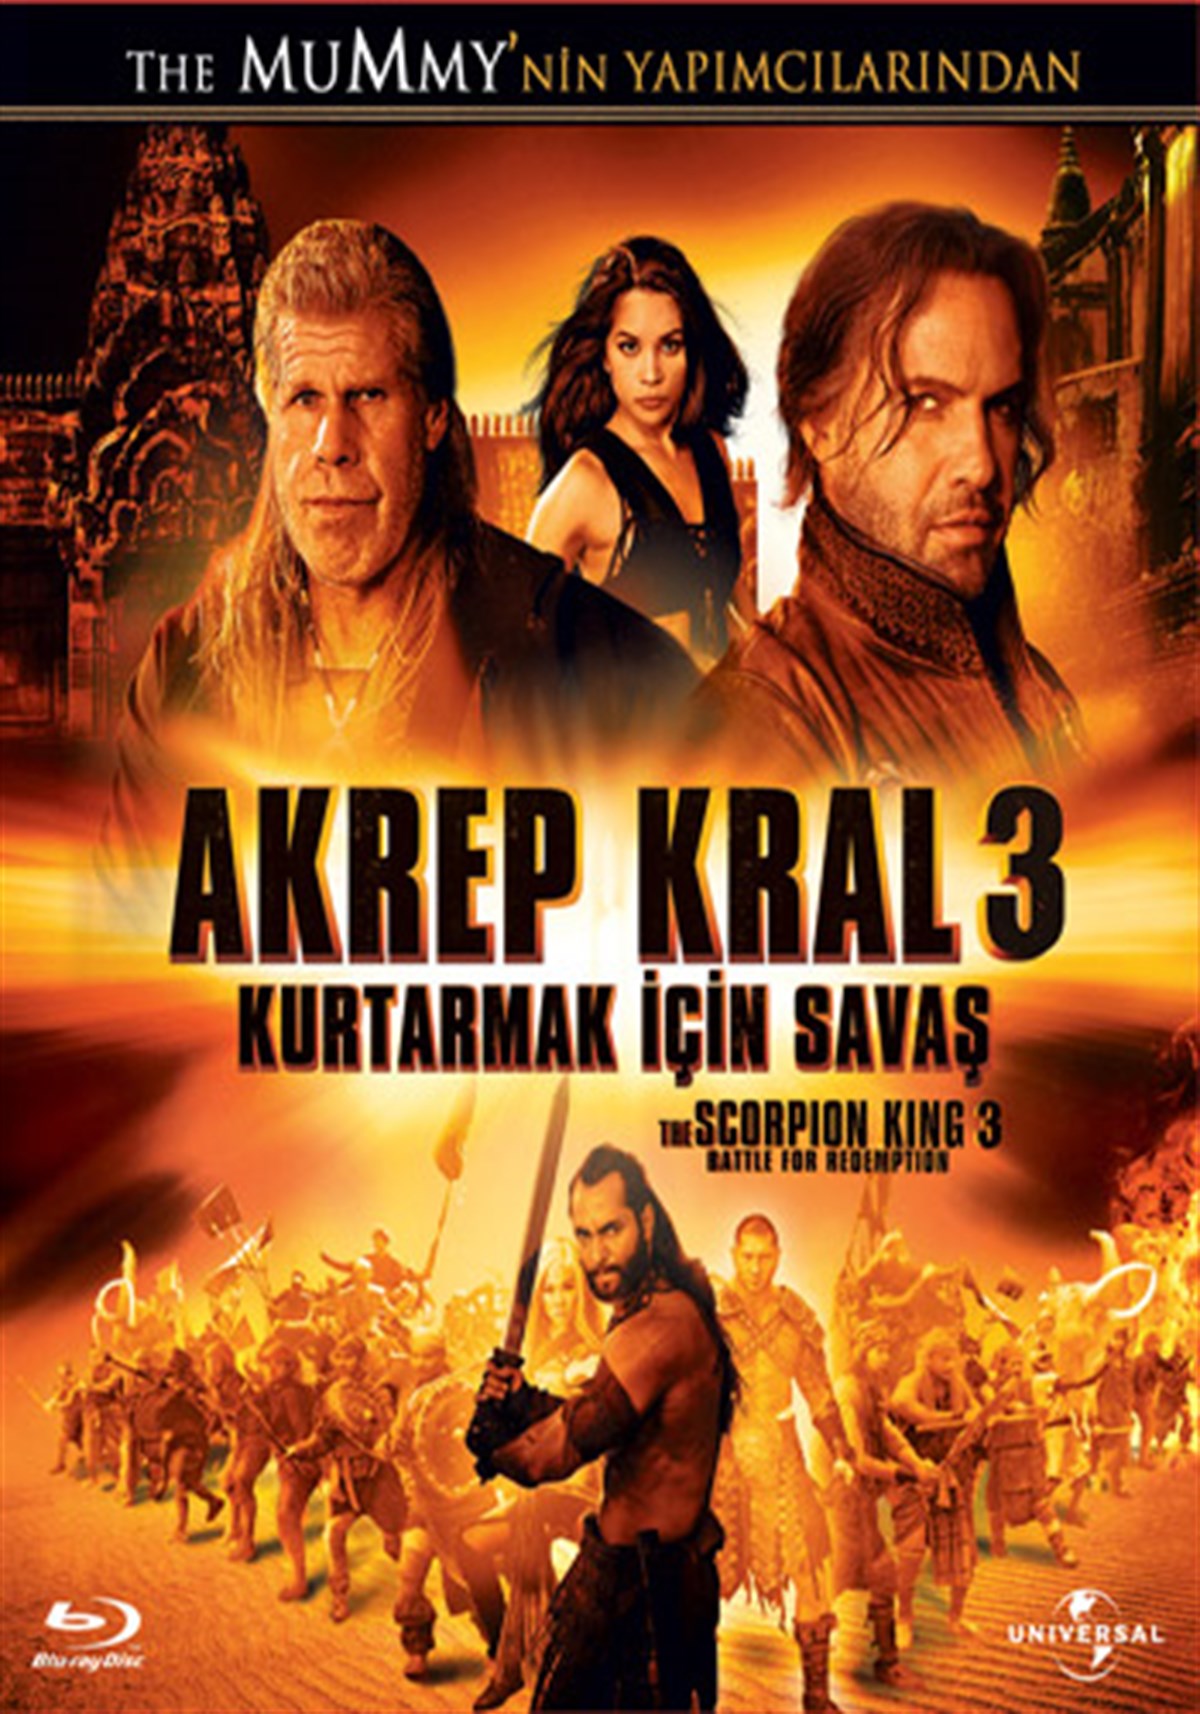 The Scorpion King 3: Battle for Redemption (2012) 448Kbps 23.976Fps 48Khz 5.1Ch BluRay Turkish Audio TAC